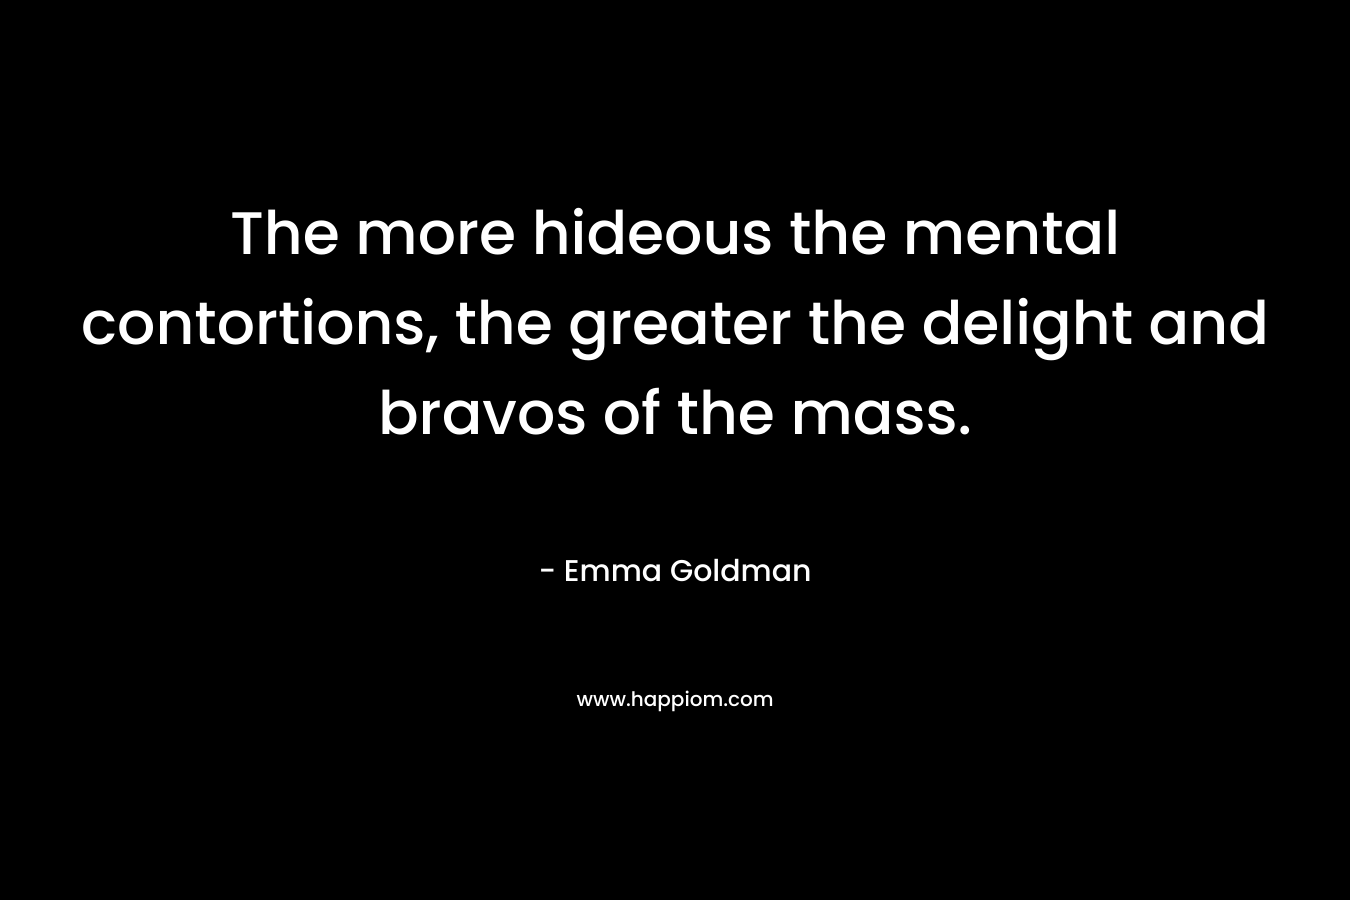 The more hideous the mental contortions, the greater the delight and bravos of the mass.